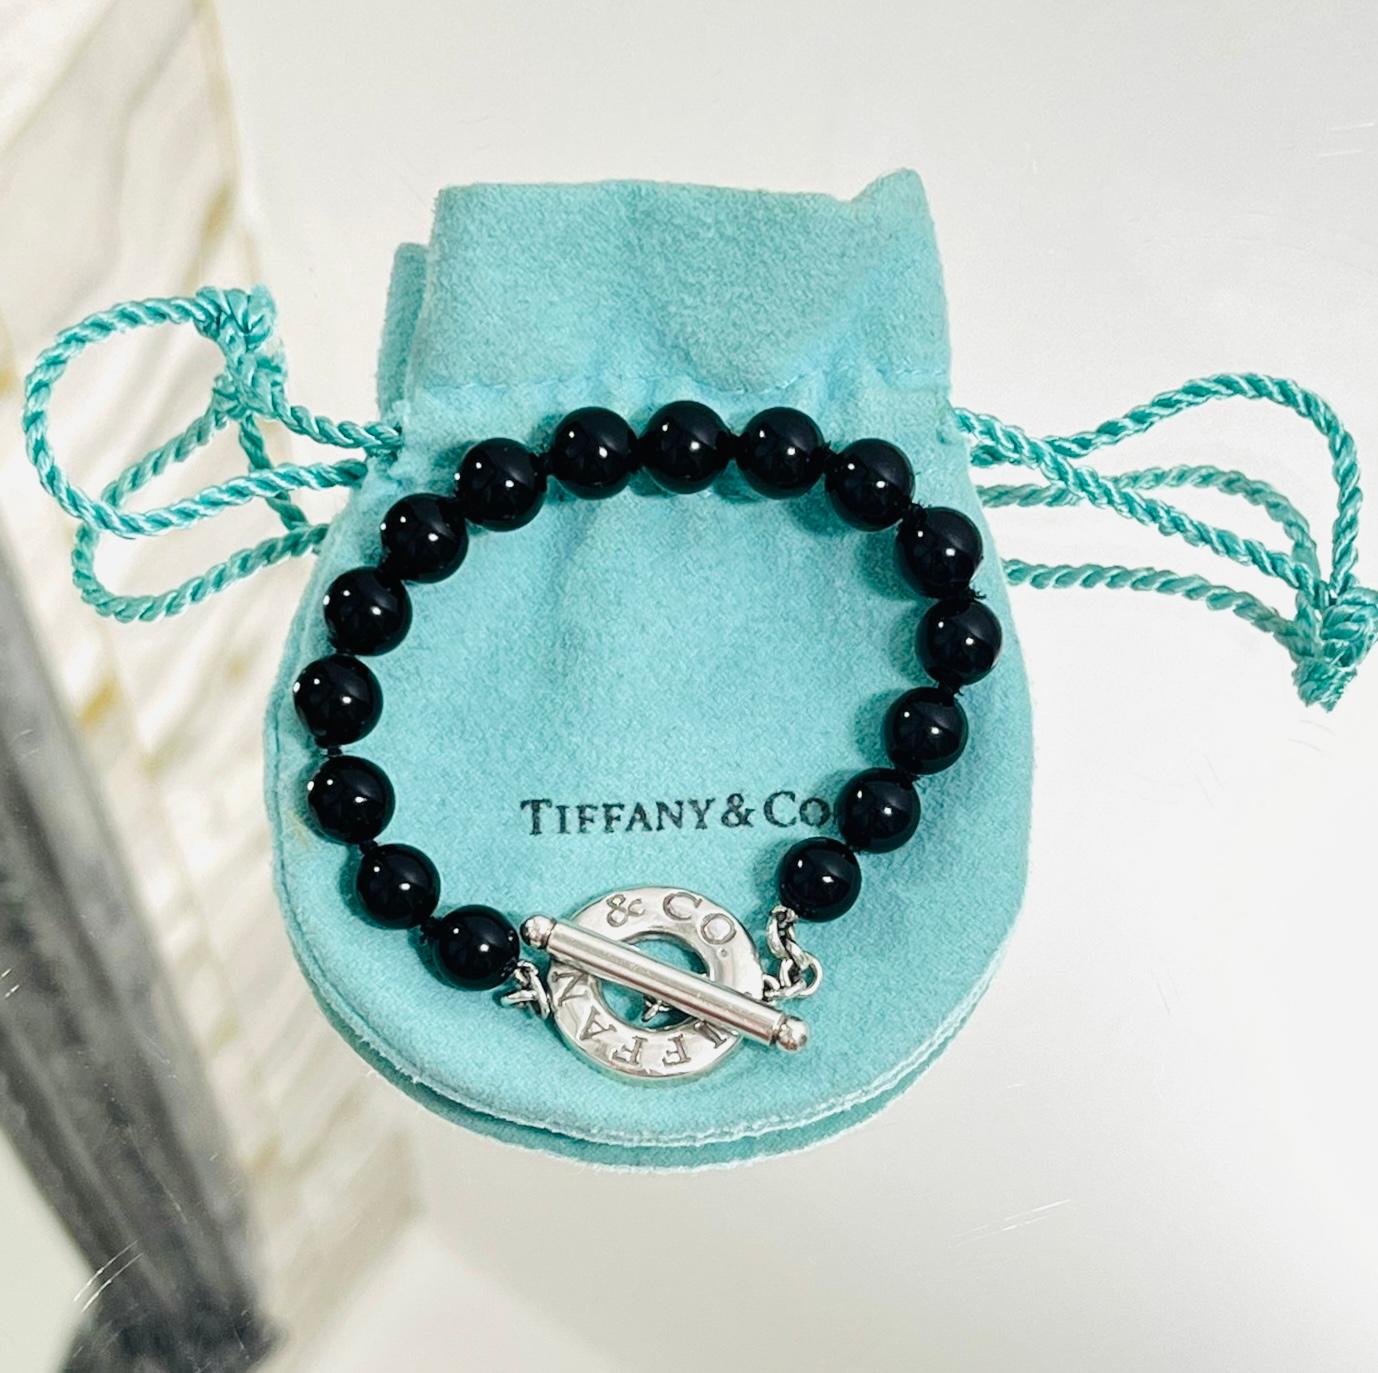 Tiffany Onyx & Sterling Silver Toggle Bracelet

Black onyx bead bracelet designed with silver toggle closure featuring 'Tiffany & Co' engravement.

Size – One Size

Condition – Very Good

Composition – Onyx, 925 Sterling Silver

Comes with – Pouch